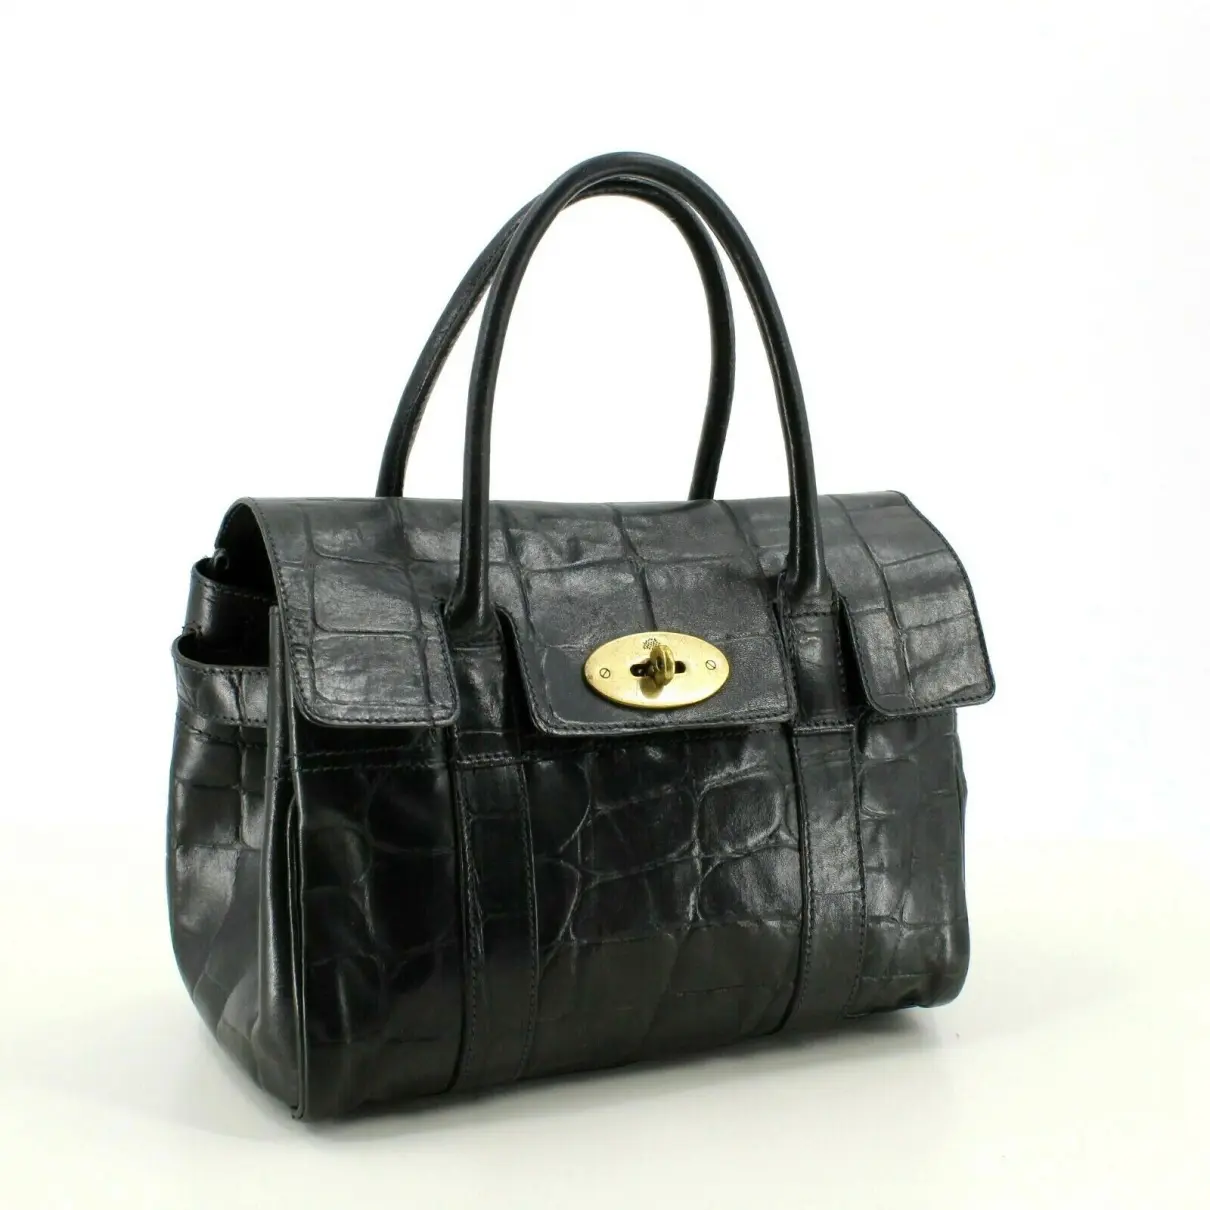 Buy Mulberry Bayswater Small leather handbag online - Vintage